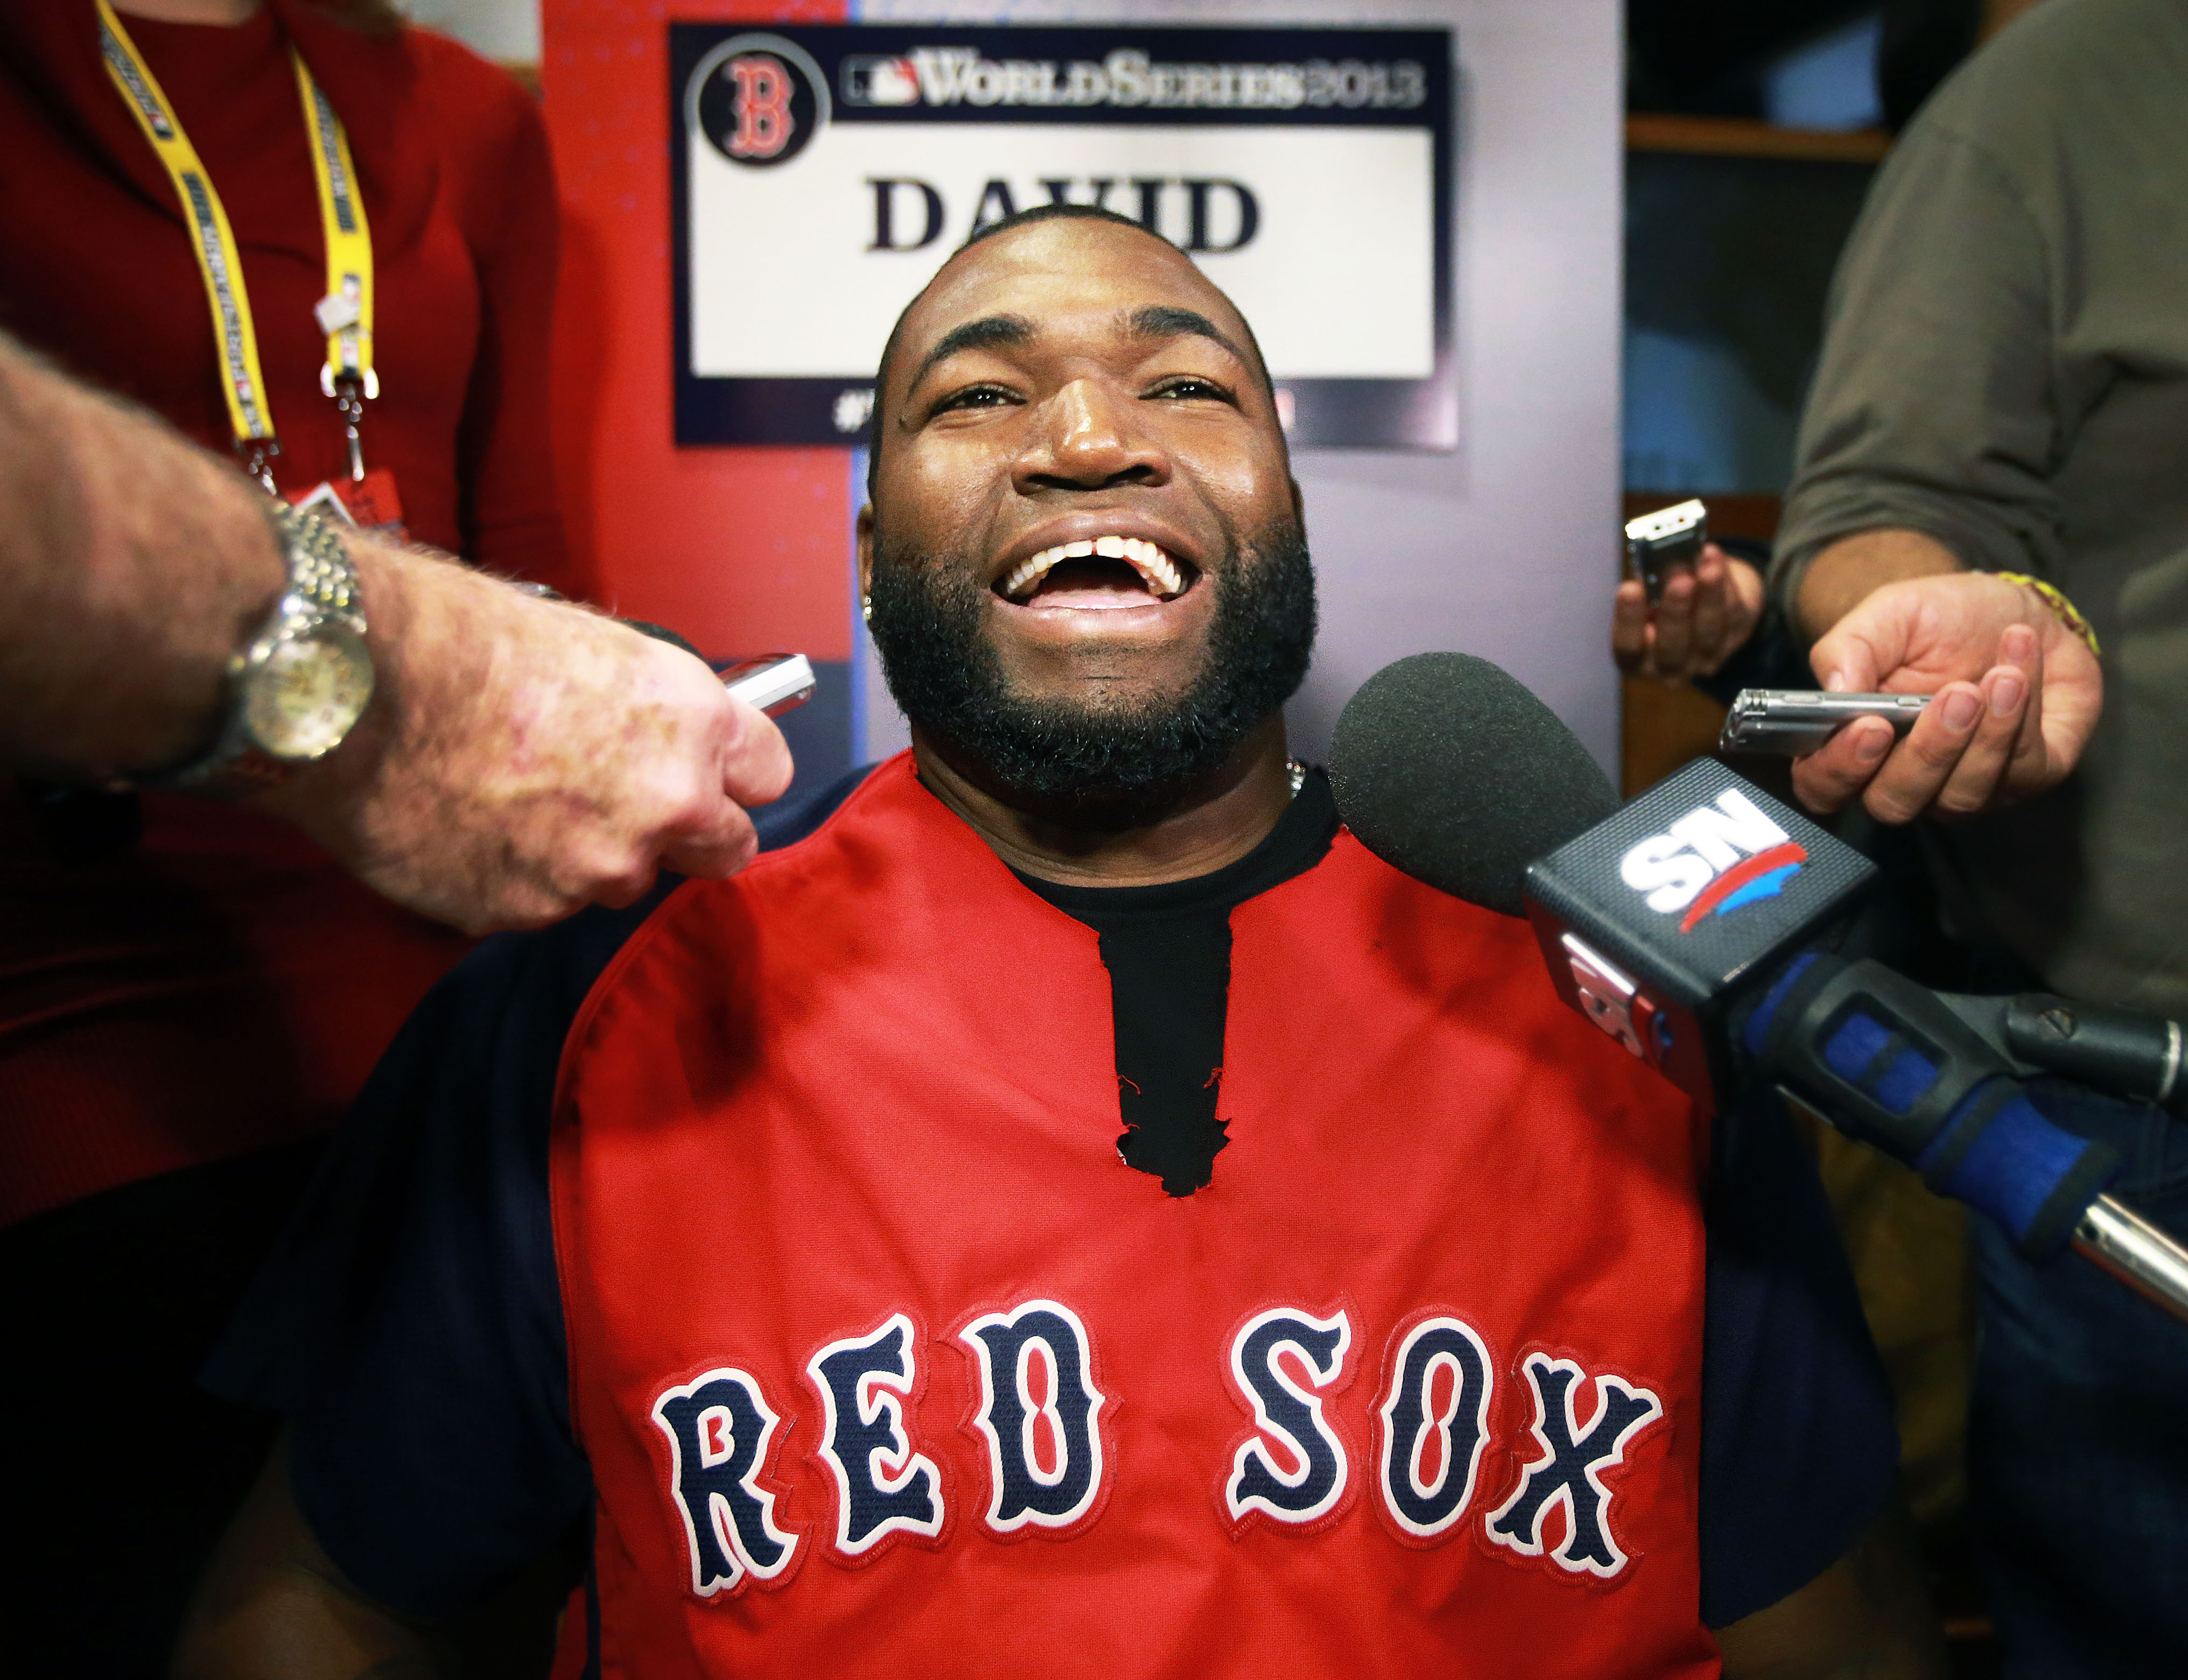 The Red Sox faced the Cardinals in the World Series that year. Here, Ortiz is shown with a smile on his face during media day ahead of the games.